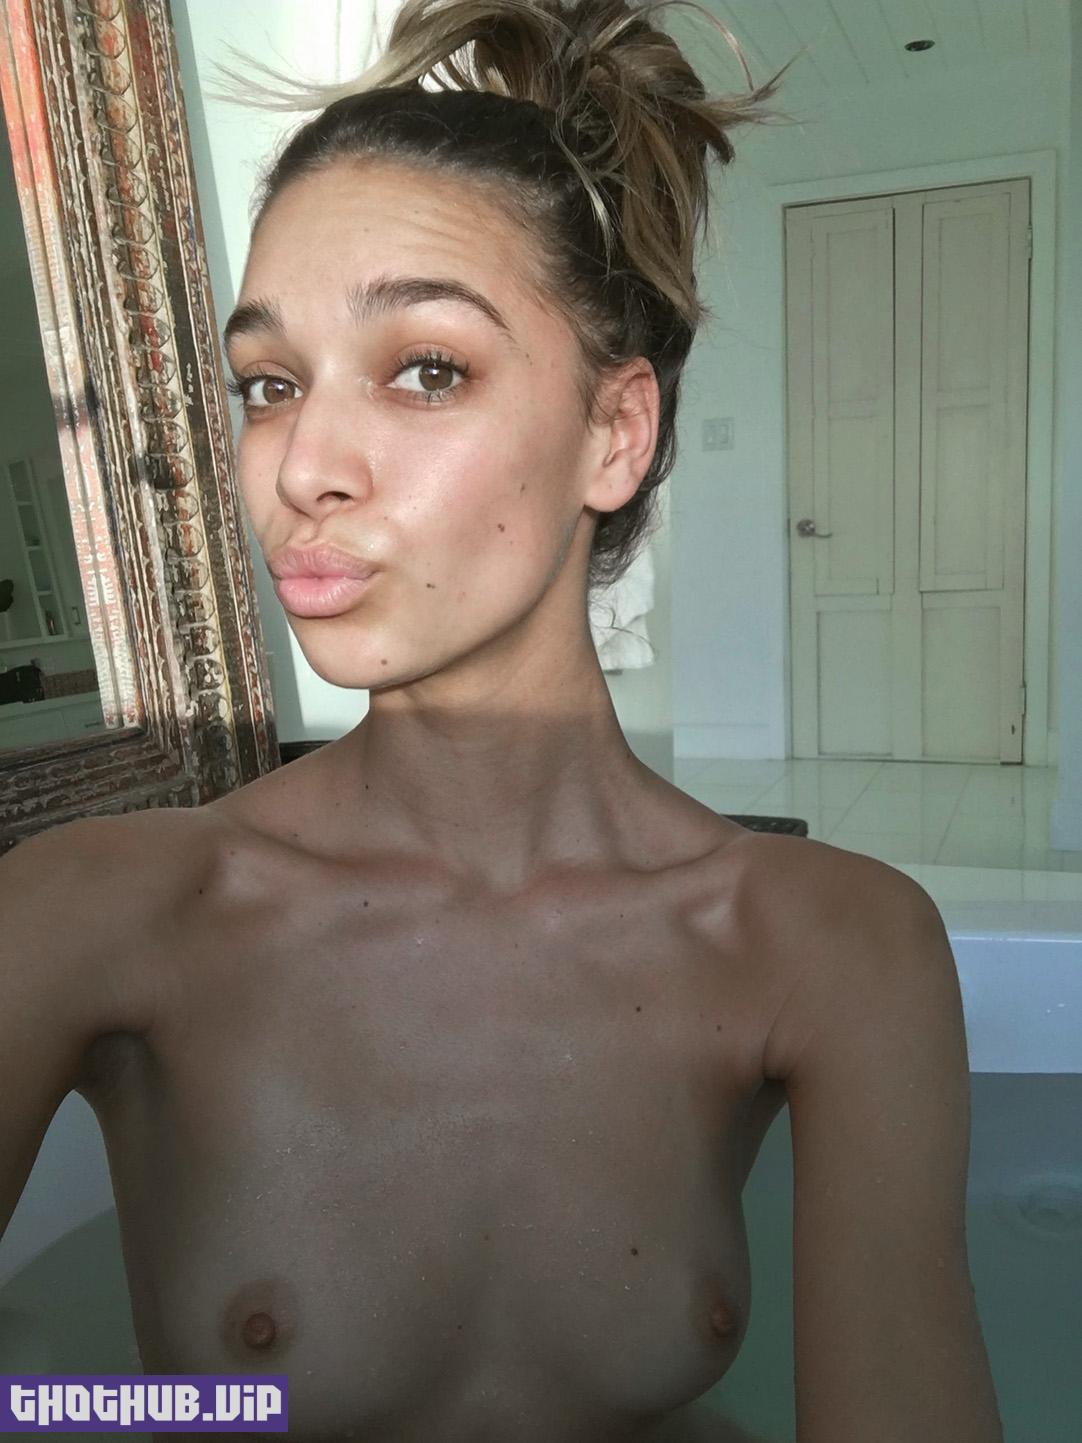 The Fappening April Love Geary leaked nude selfies hacked from iCloud